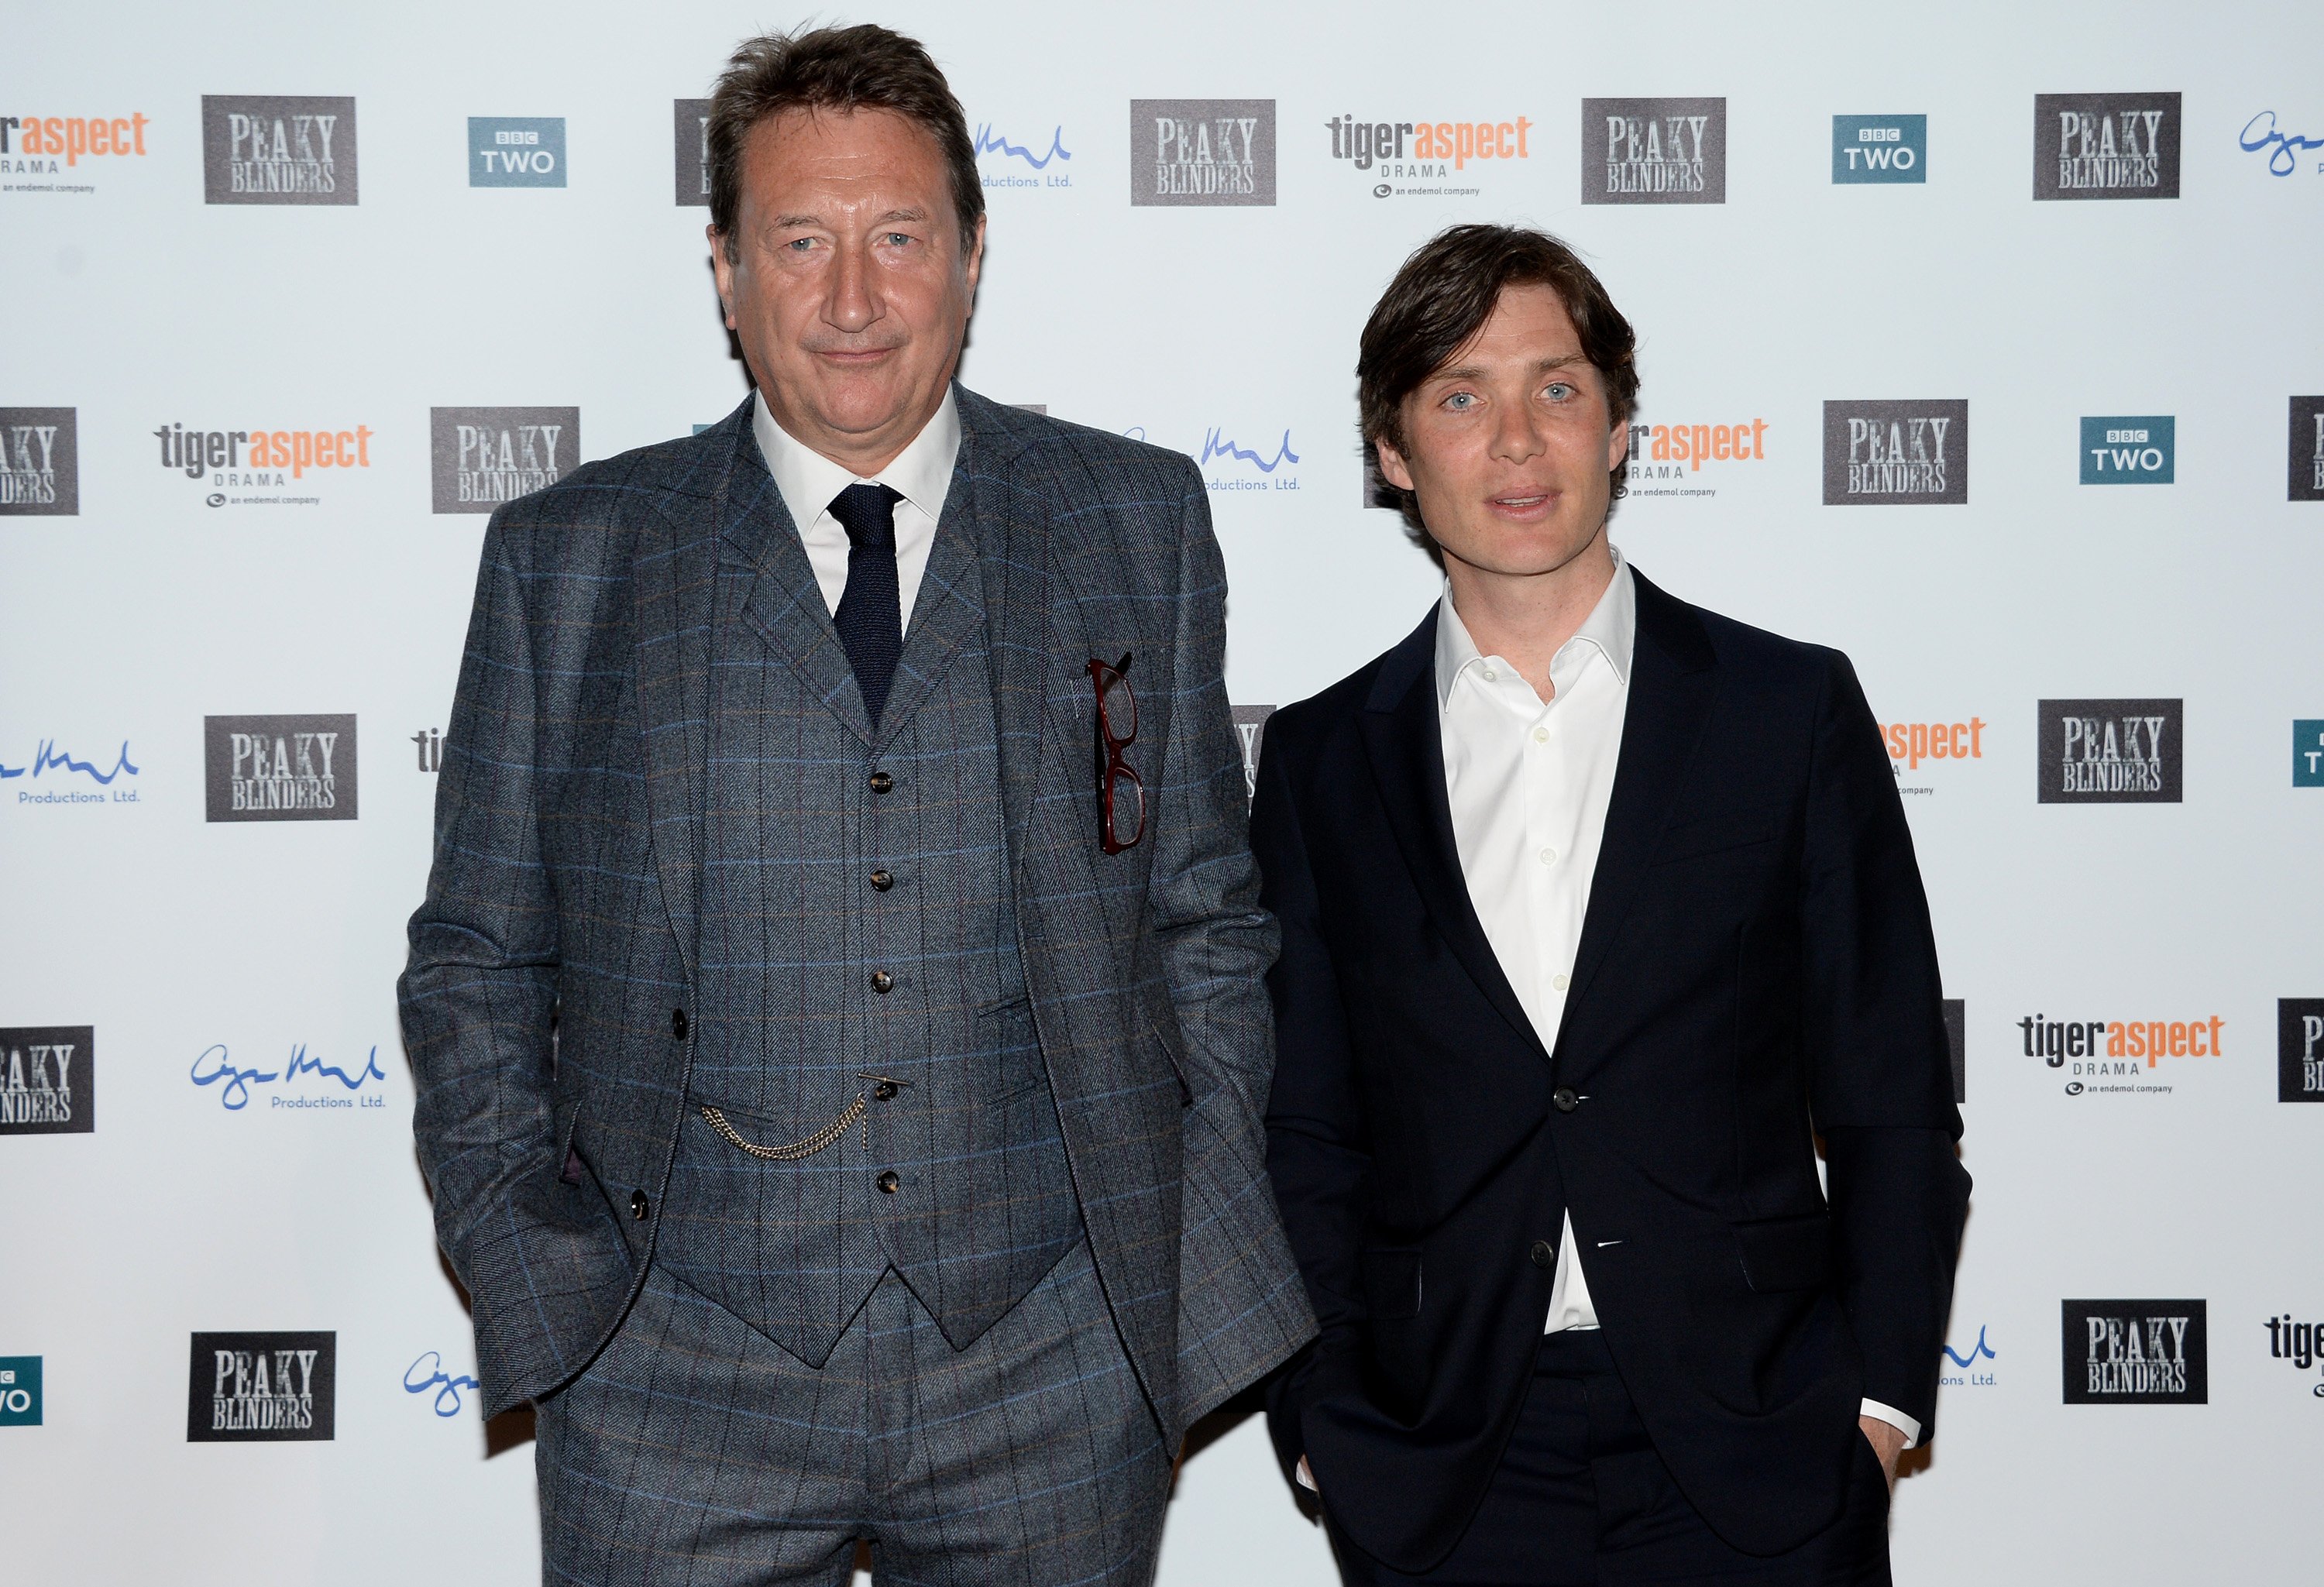 Steven Knight and Cillian Murphy at the premiere of 'Peaky Blinders' Season 3, Episode 1. Knight is wearing a suit and tie and Murphy is wearing a white dress shirt and black jacket.